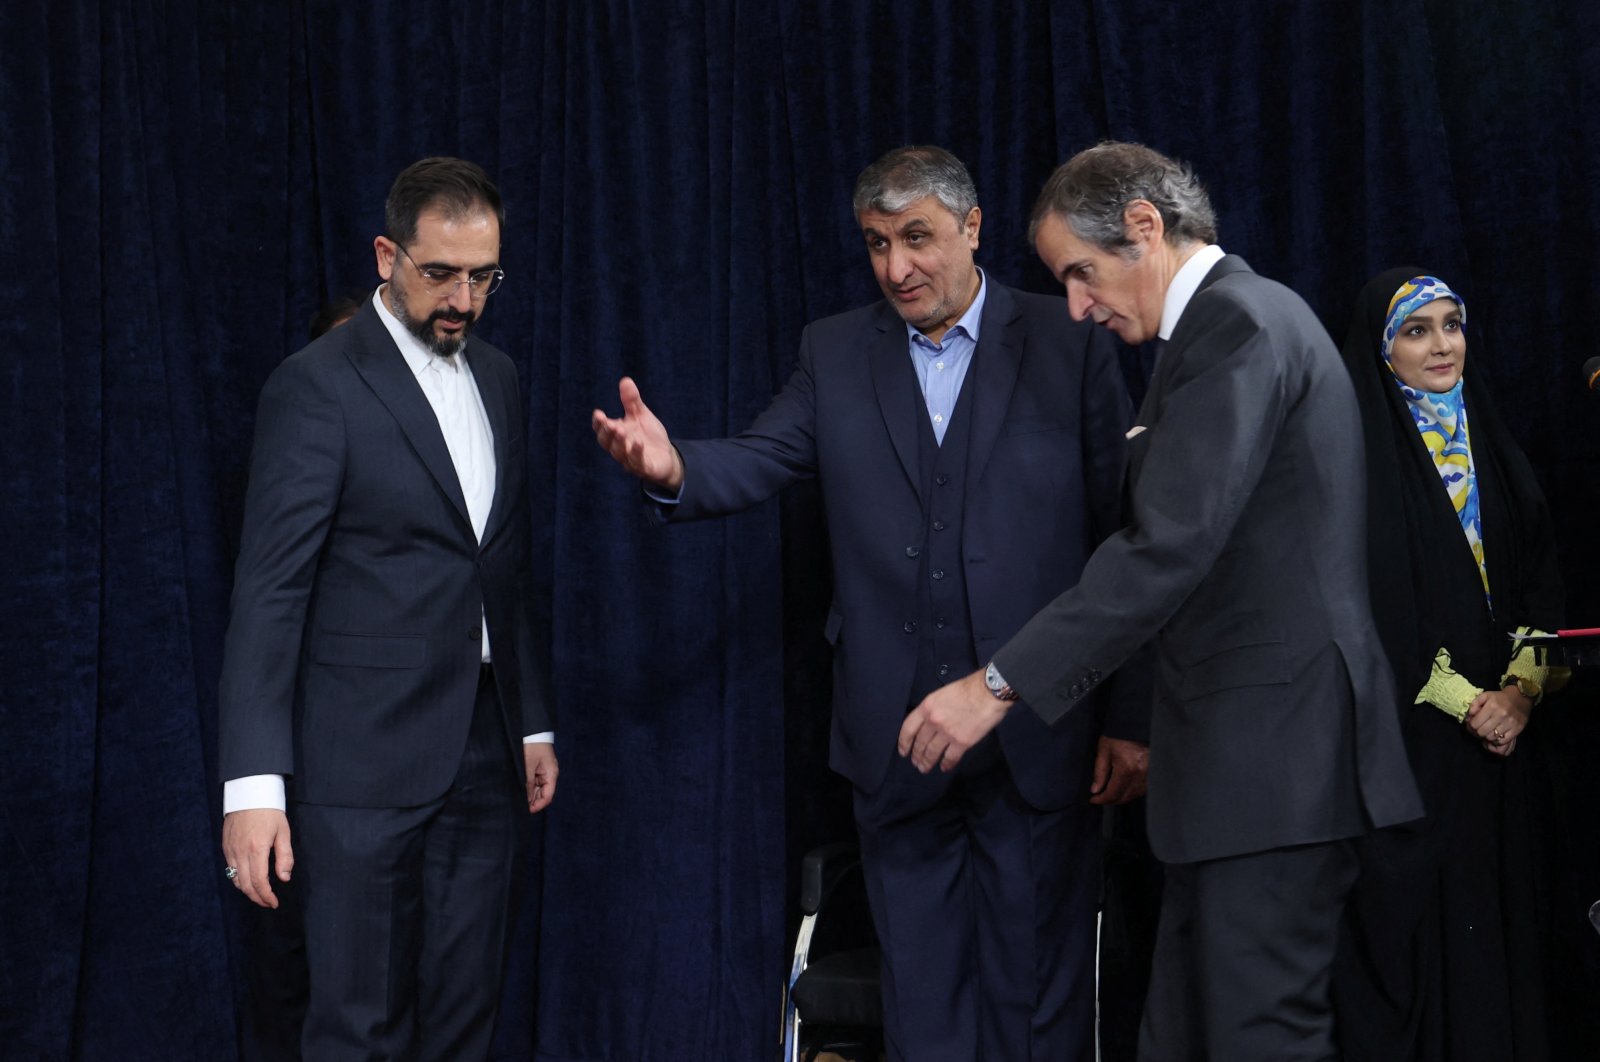 Head of Iran&#039;s Atomic Energy Organization Mohammad Eslami and International Atomic Energy Agency (IAEA) Director General Rafael Grossi arrive at a news conference, in Tehran, Iran, March 4, 2023. (Reuters Photo)